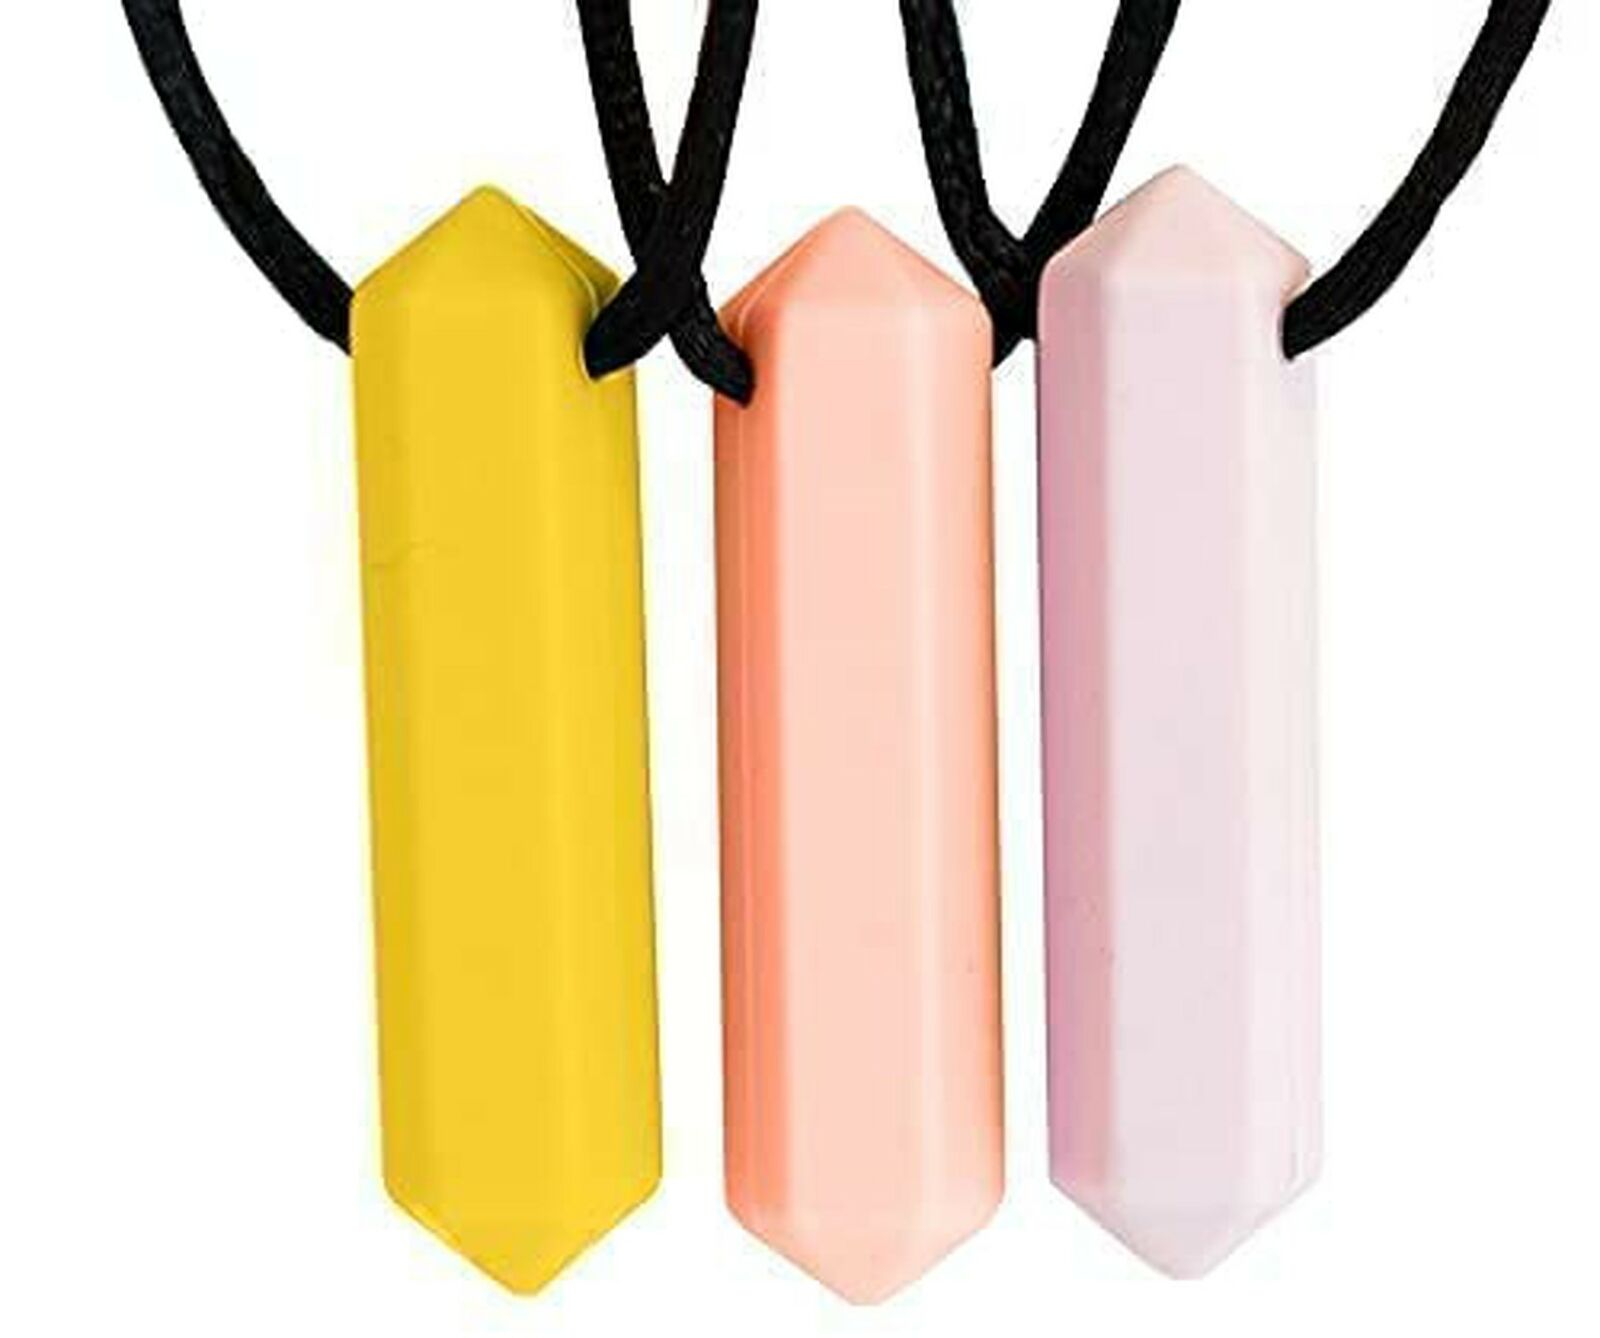 Tilcare Chew Chew Sensory Necklace – Best For Kids Or Adults